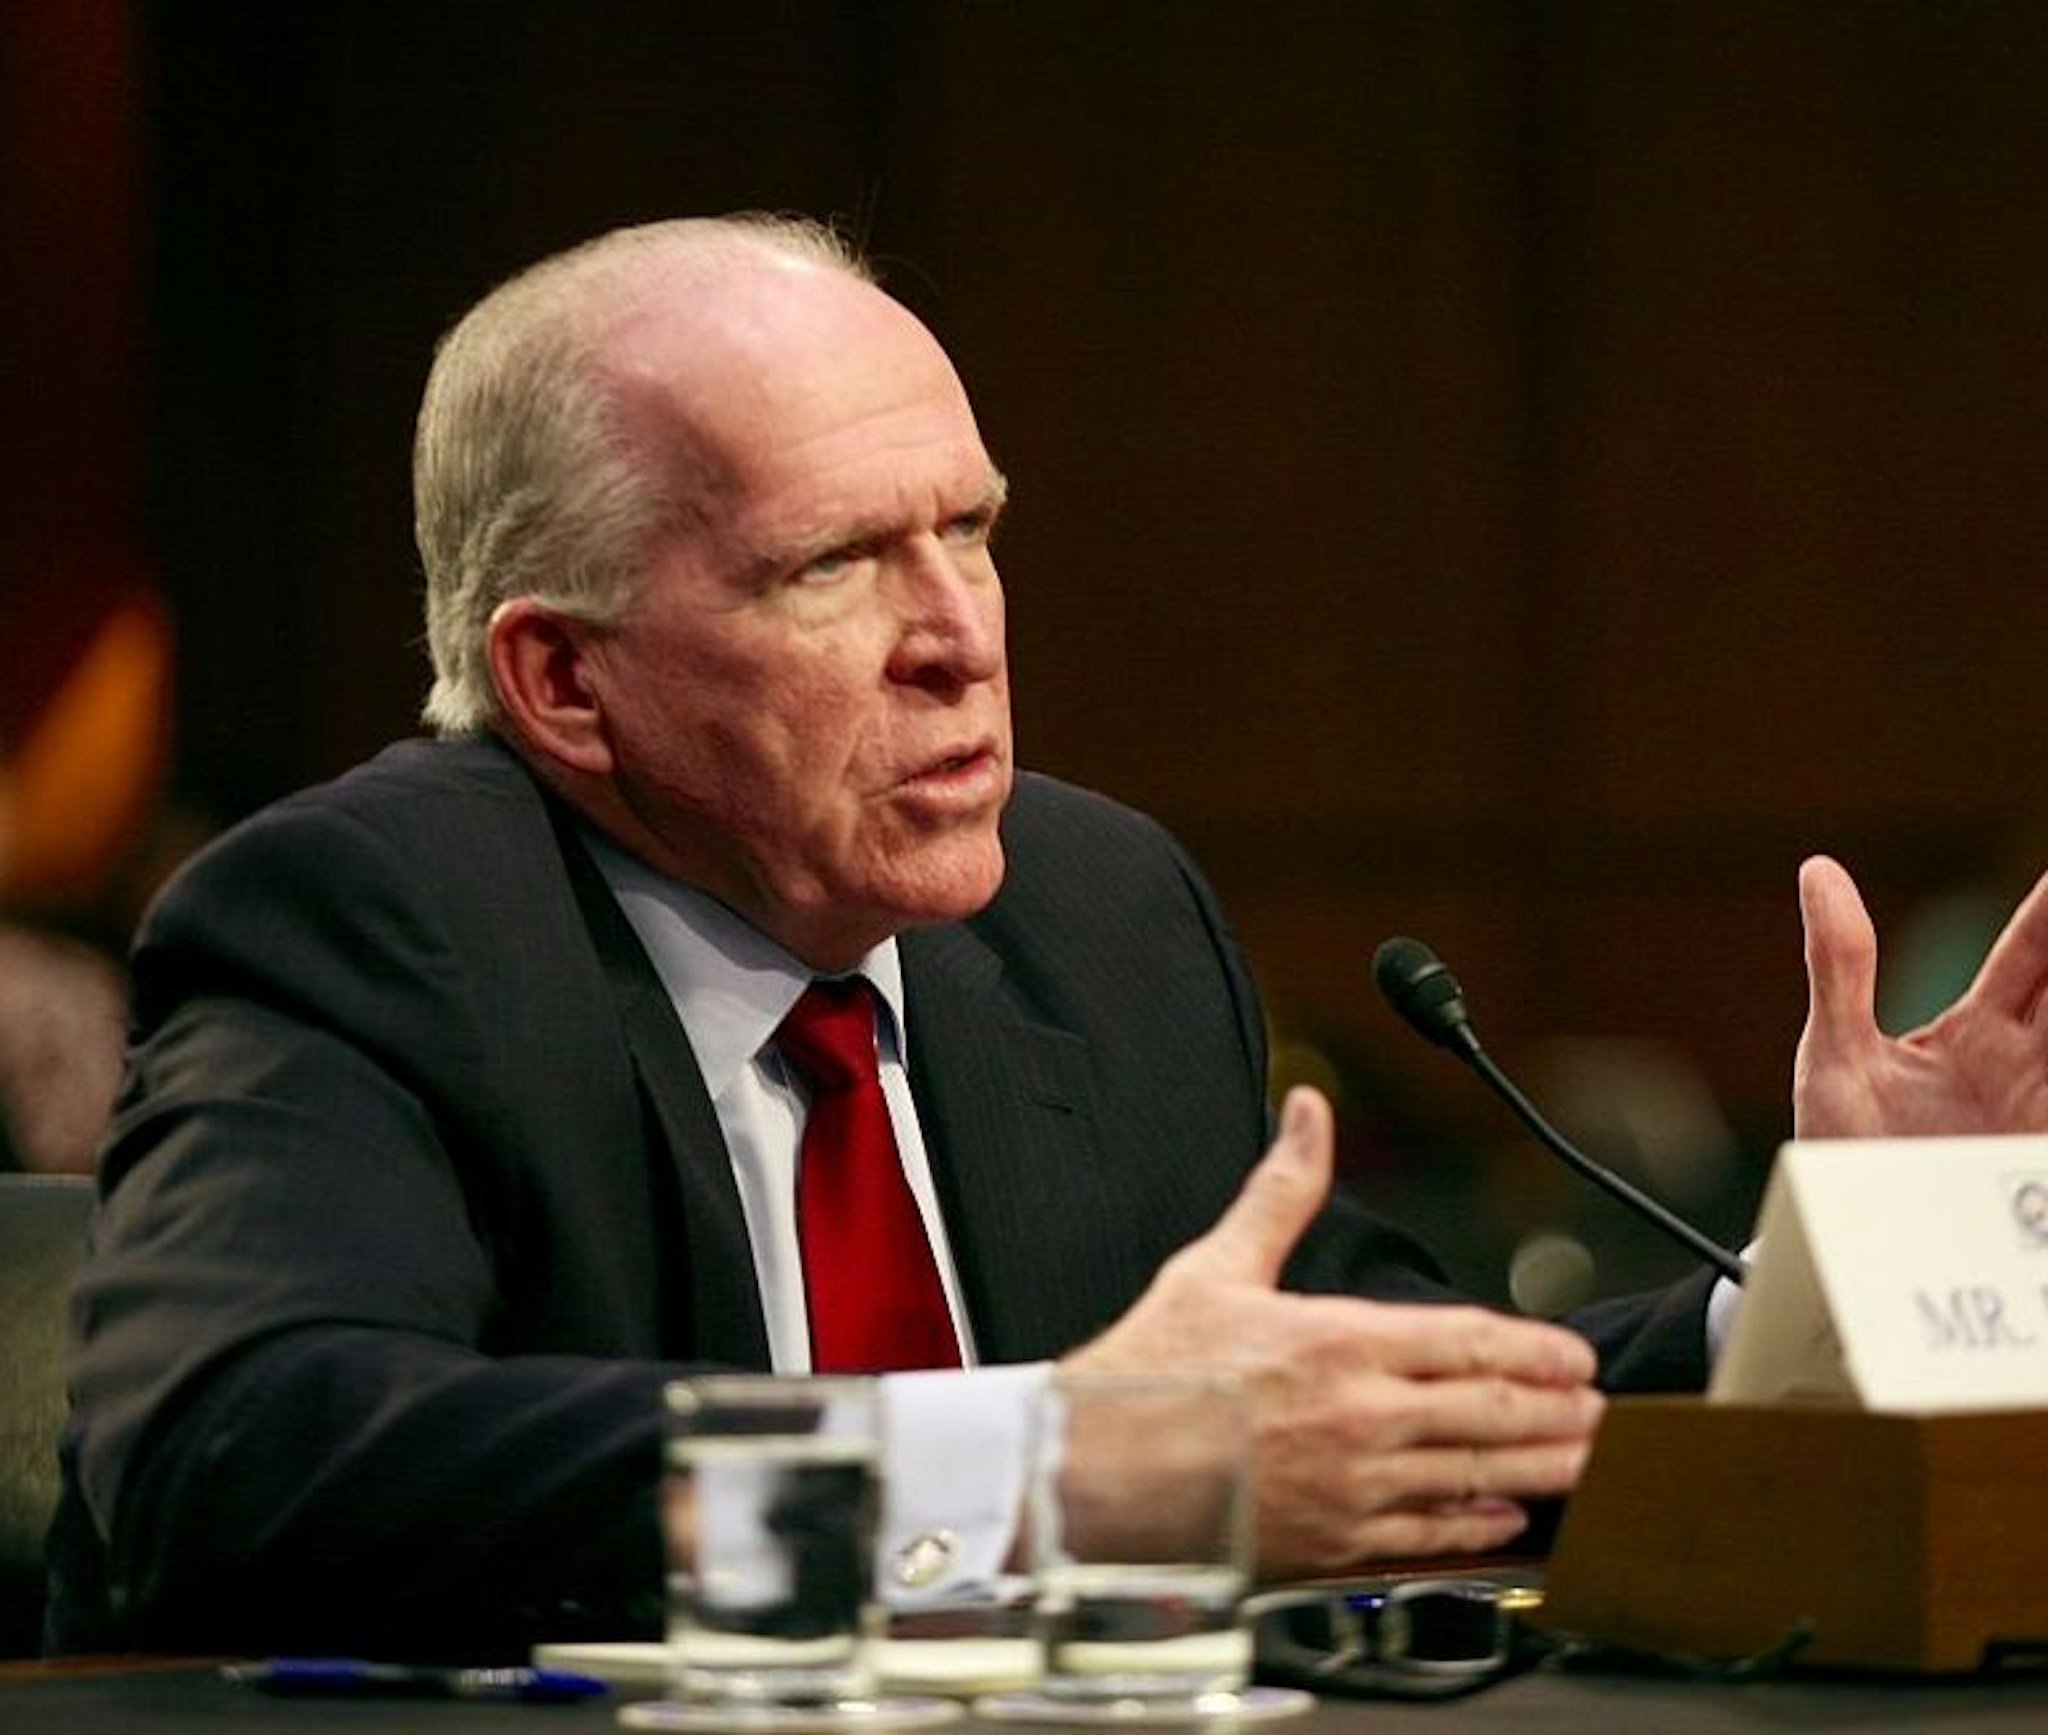 WASHINGTON, DC - JUNE 16: CIA Director John Brennan testifies during a Senate Committee hearing on national security on Capitol Hill June 16, 2016 in Washington, DC. Brennan said that despite gains on the battlefield, the West still faces a serious terror threat from ISIS.